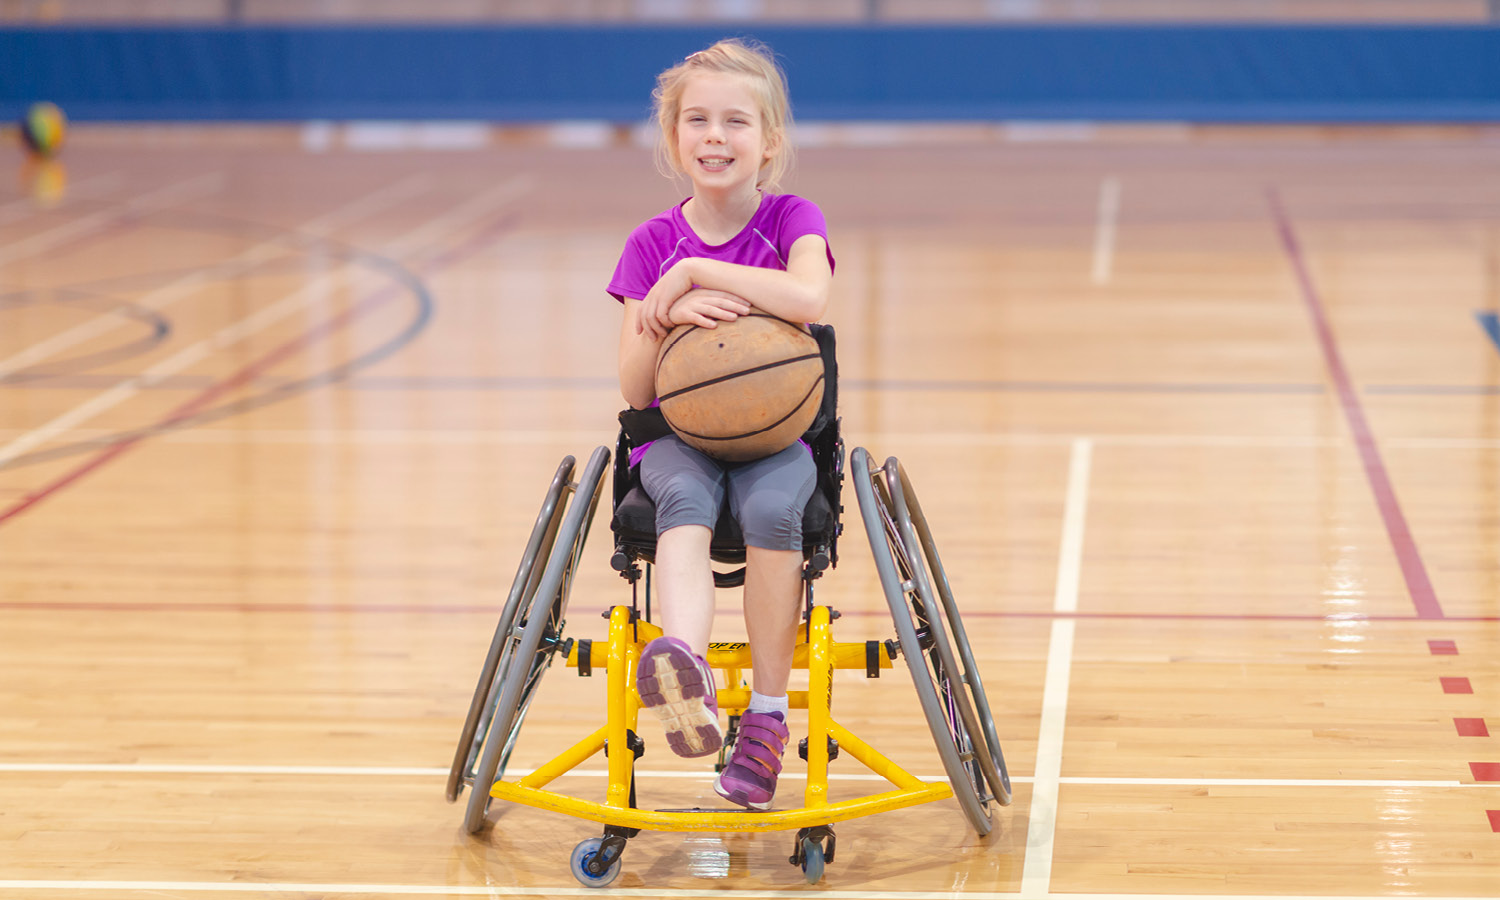 Young girl in wheelchair holding basketball on the basketball court.